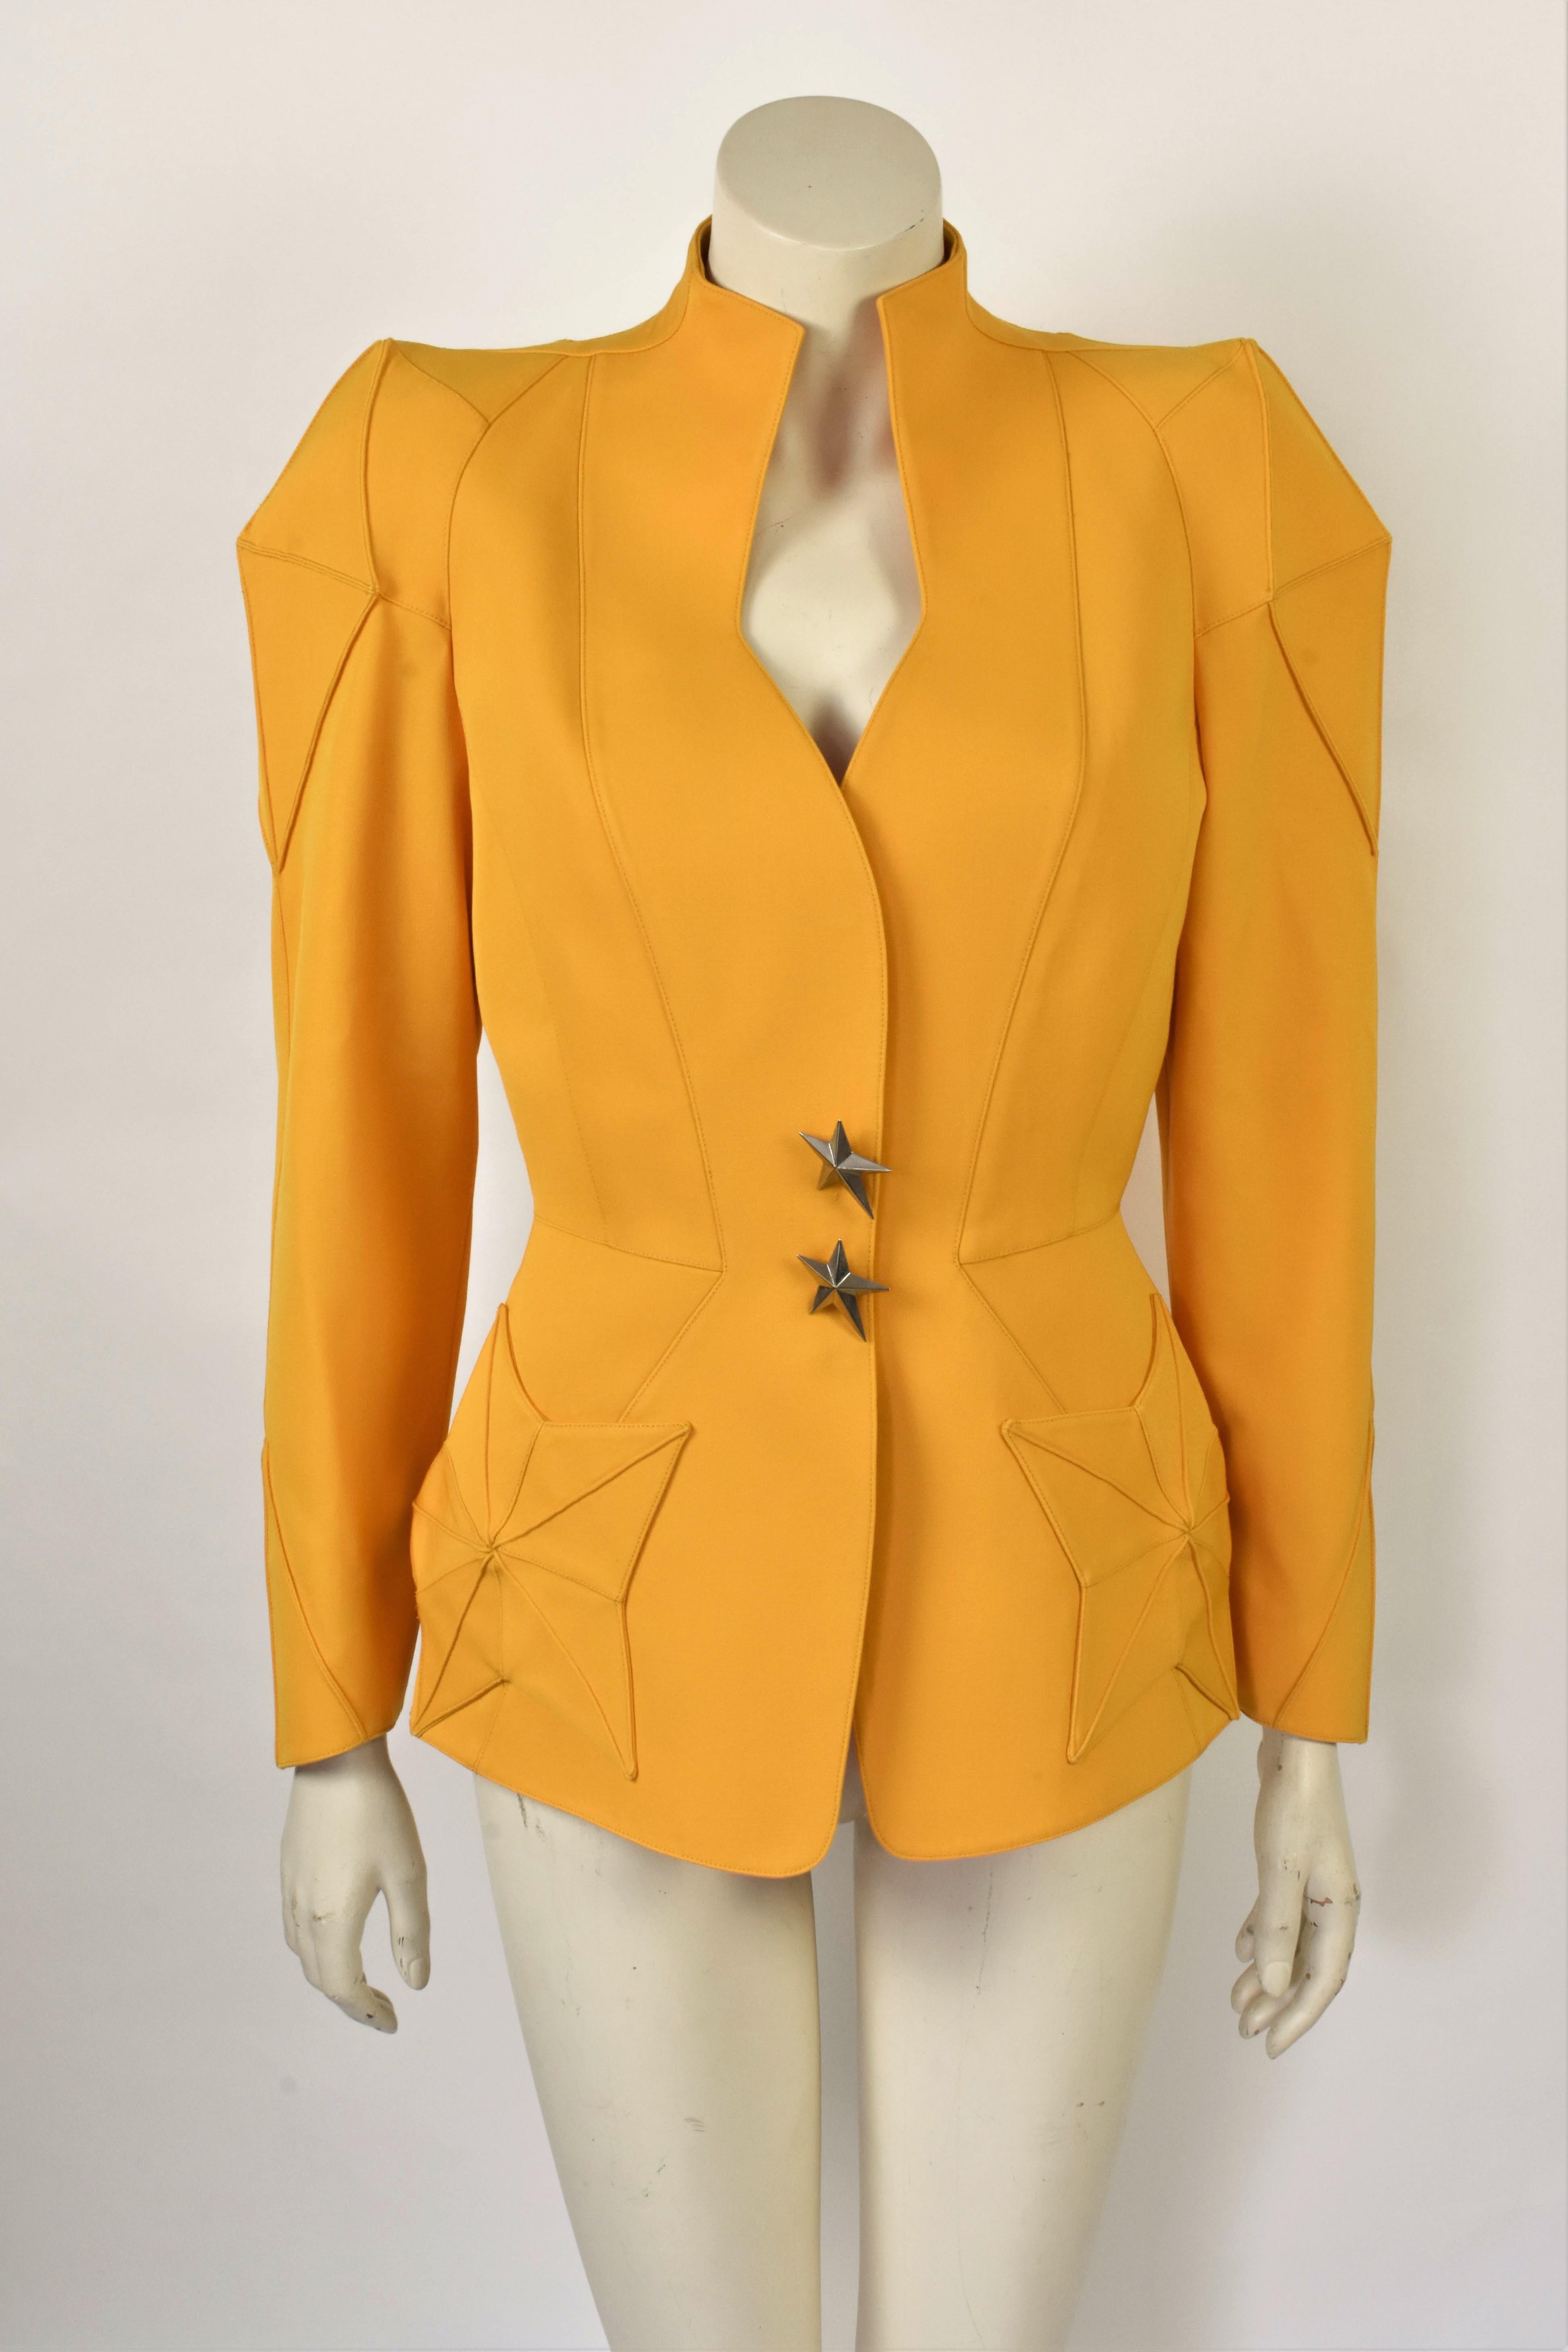 This is a lovely sculptural Thierry Mugler jacket with a strong feminine silhouette from the 80s. It has star shaped pockets and two Mugler star brooches serving as buttons. The star shape is favorited by Mugler and is most know from his best